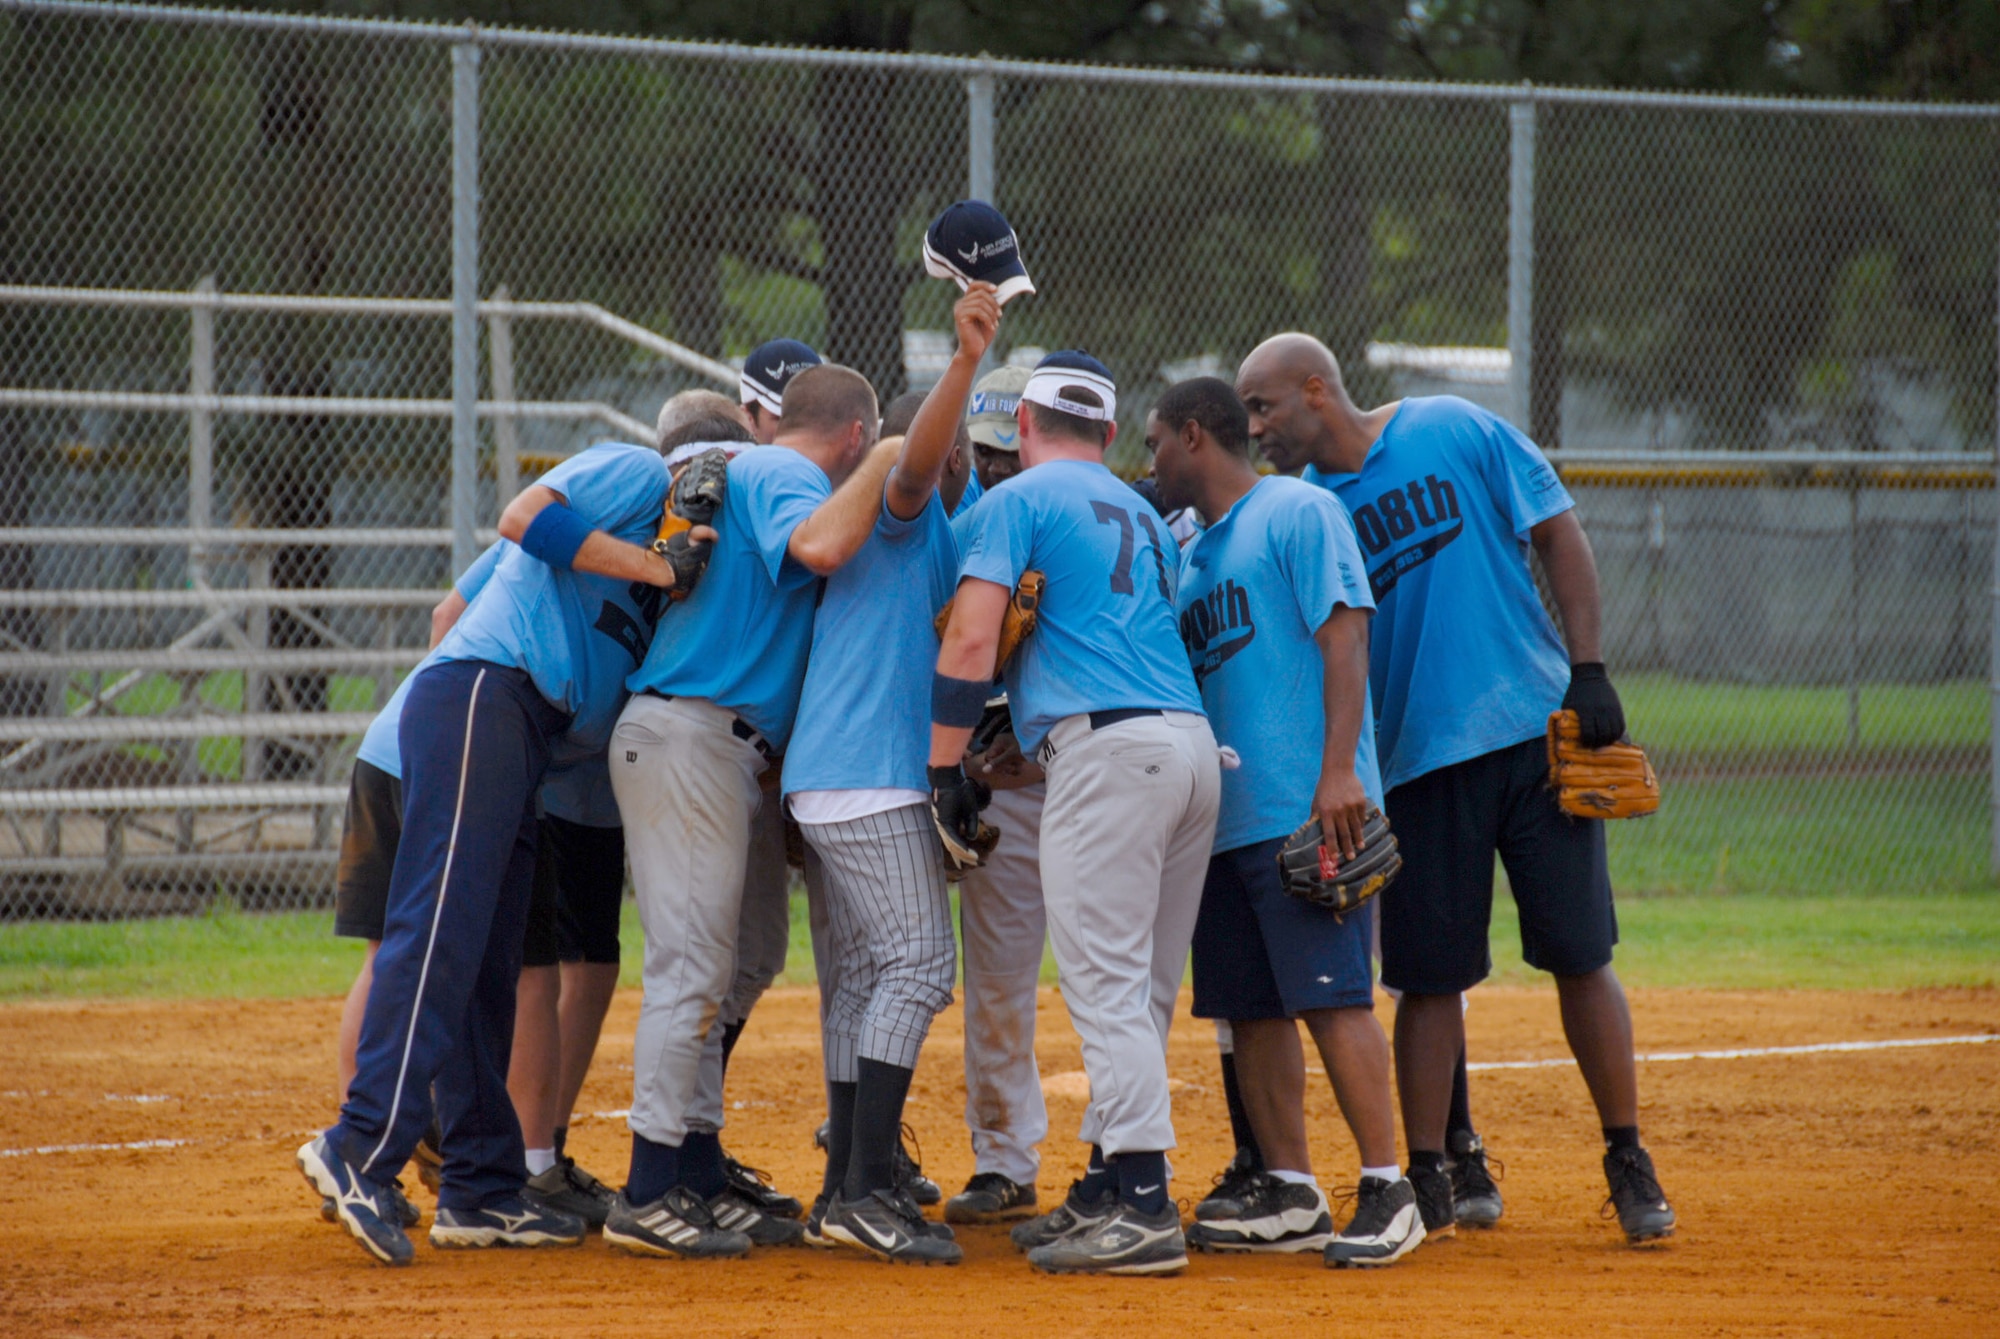 The 908th Airlift Wing softball team captured the Maxwell-Gunter intramural softball championship title July 30 against the Electronic Systems Group team. The 908th won the championship for the second consecutive year. (U.S. Air Force photo/Jamie Pitcher)